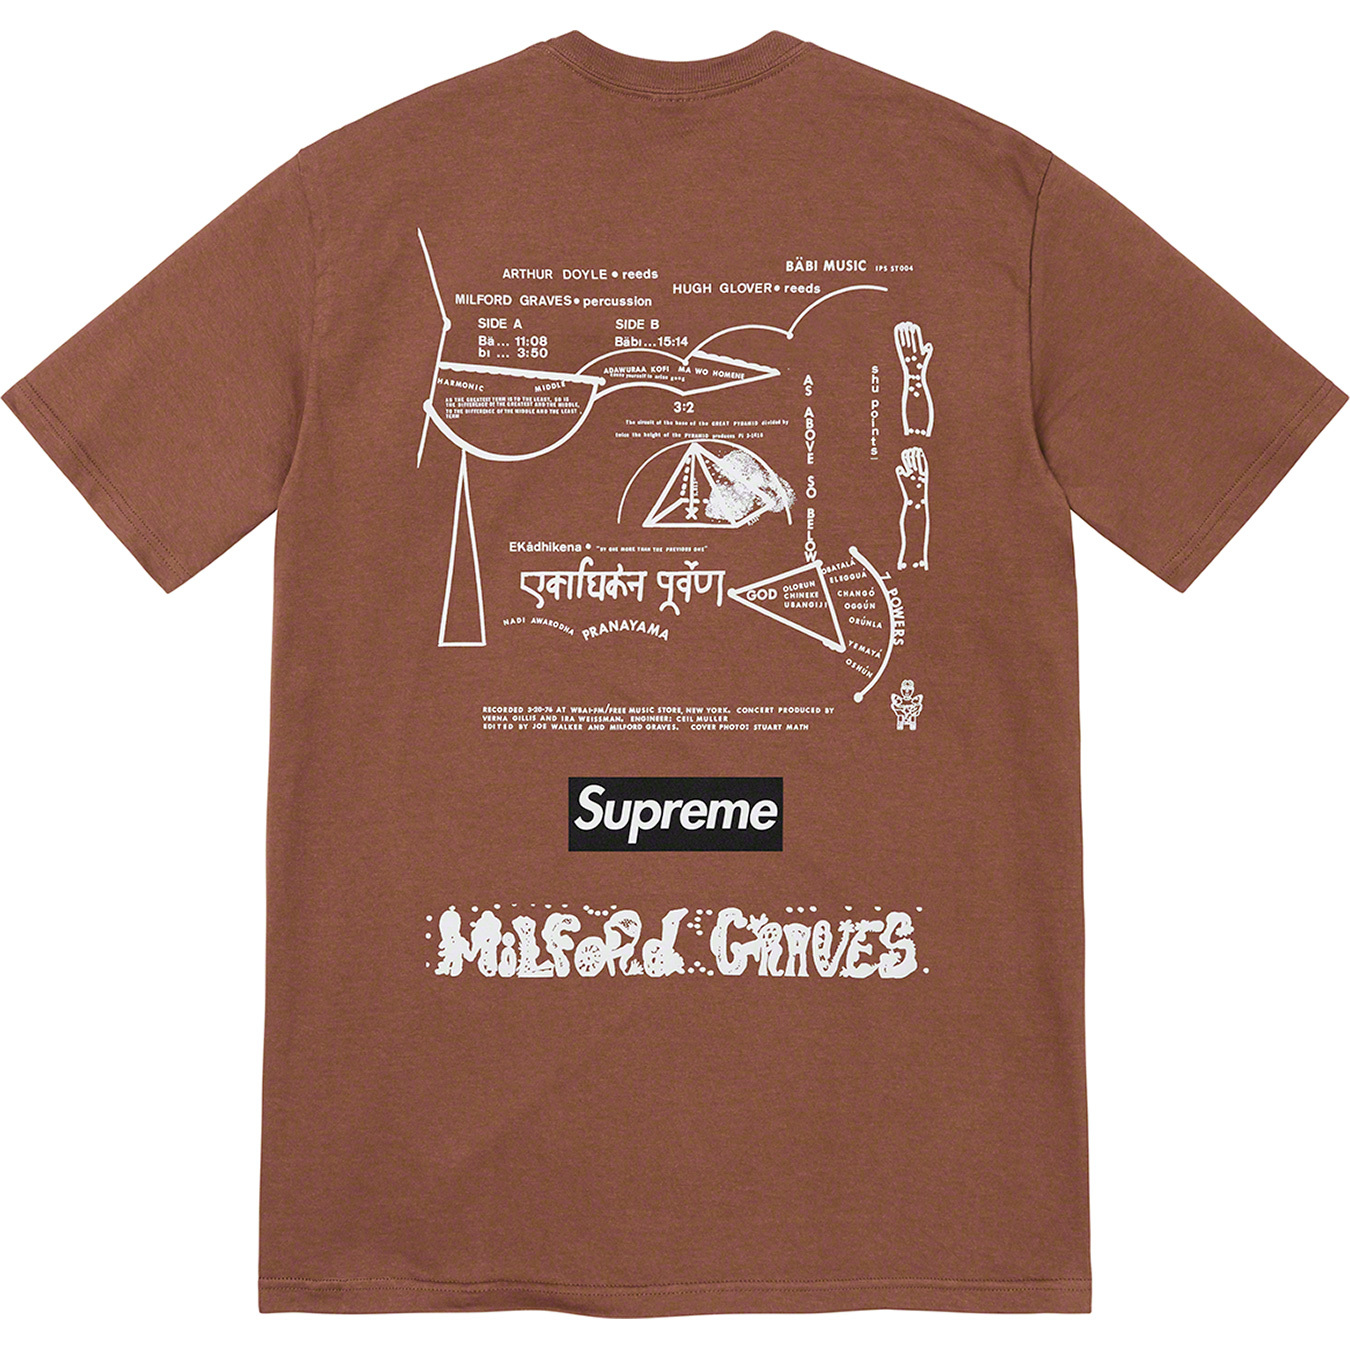 Milford Graves Tee - fall winter 2022 - Supreme